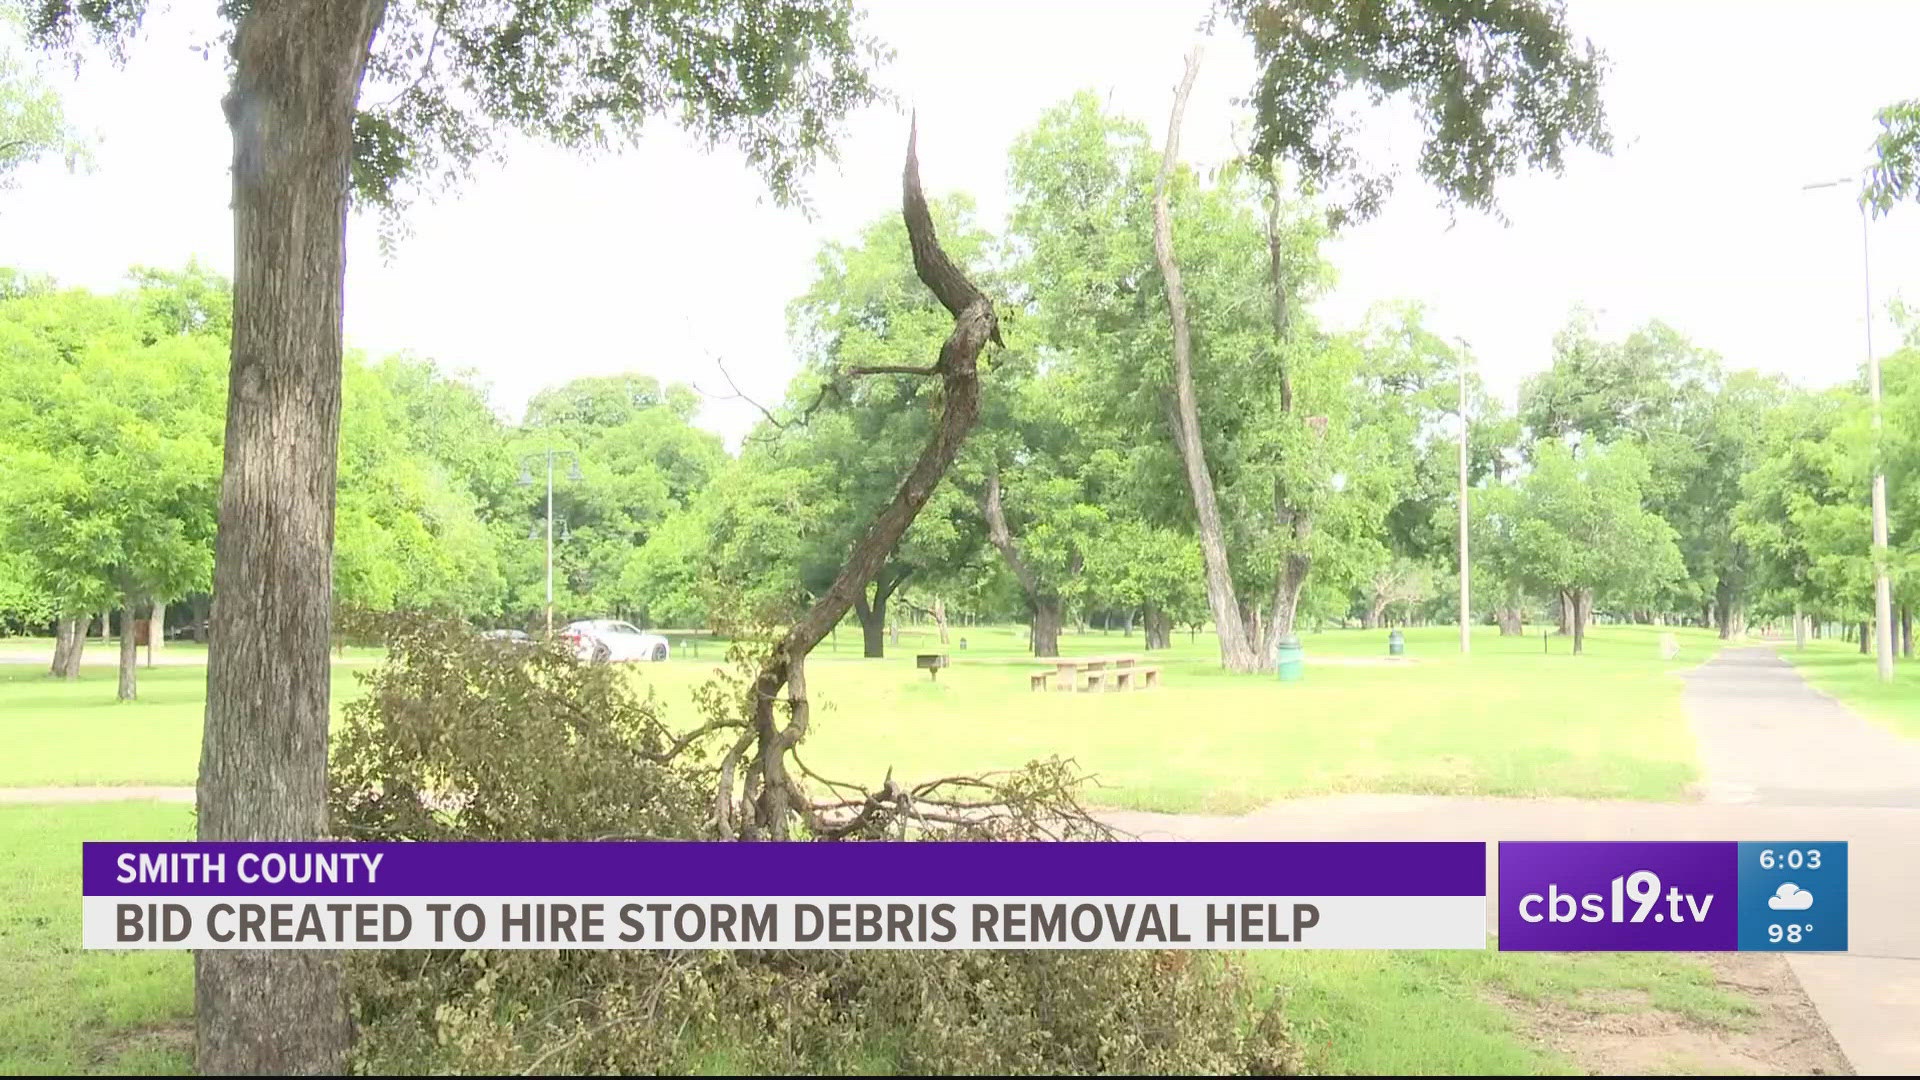 Smith County commissioners to seek bids for contractor to assist with storm debris cleanup